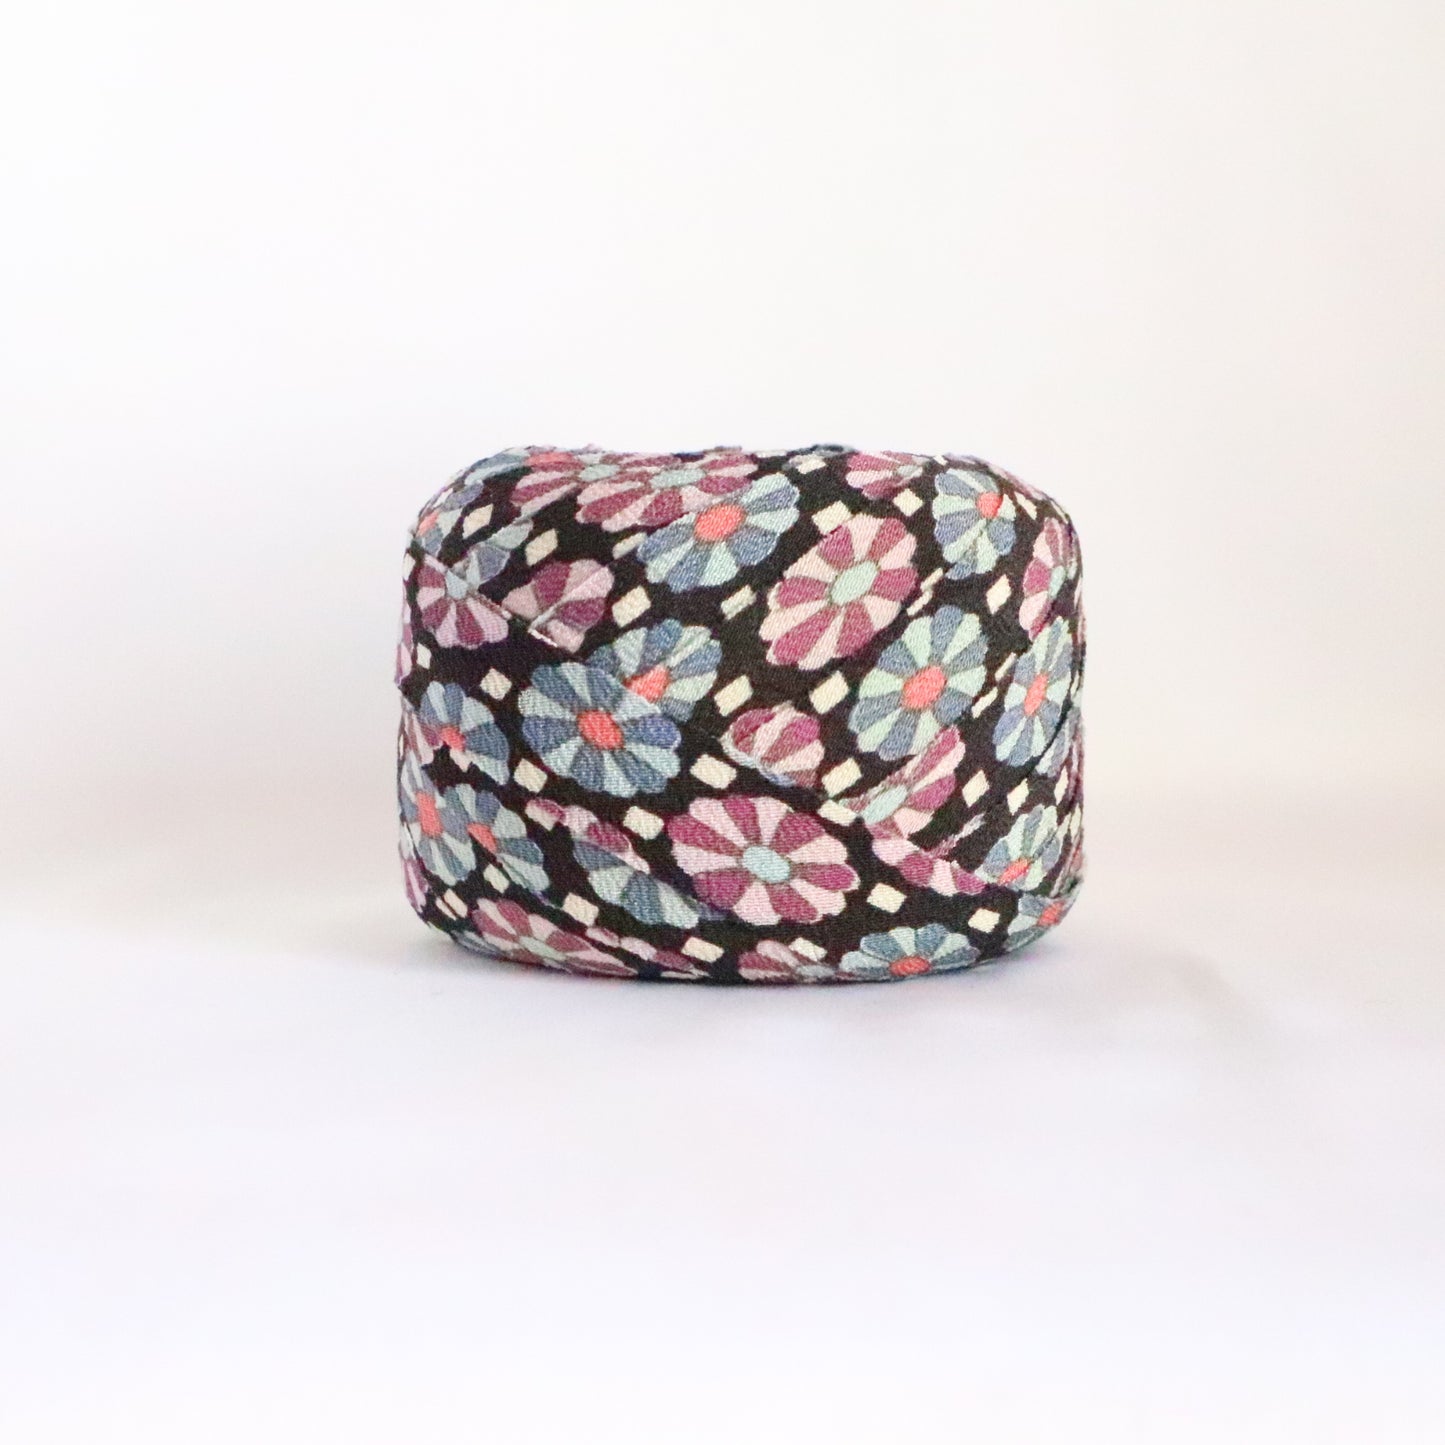 Black with light blue and purple floral pattern, crepe (Y02311025)